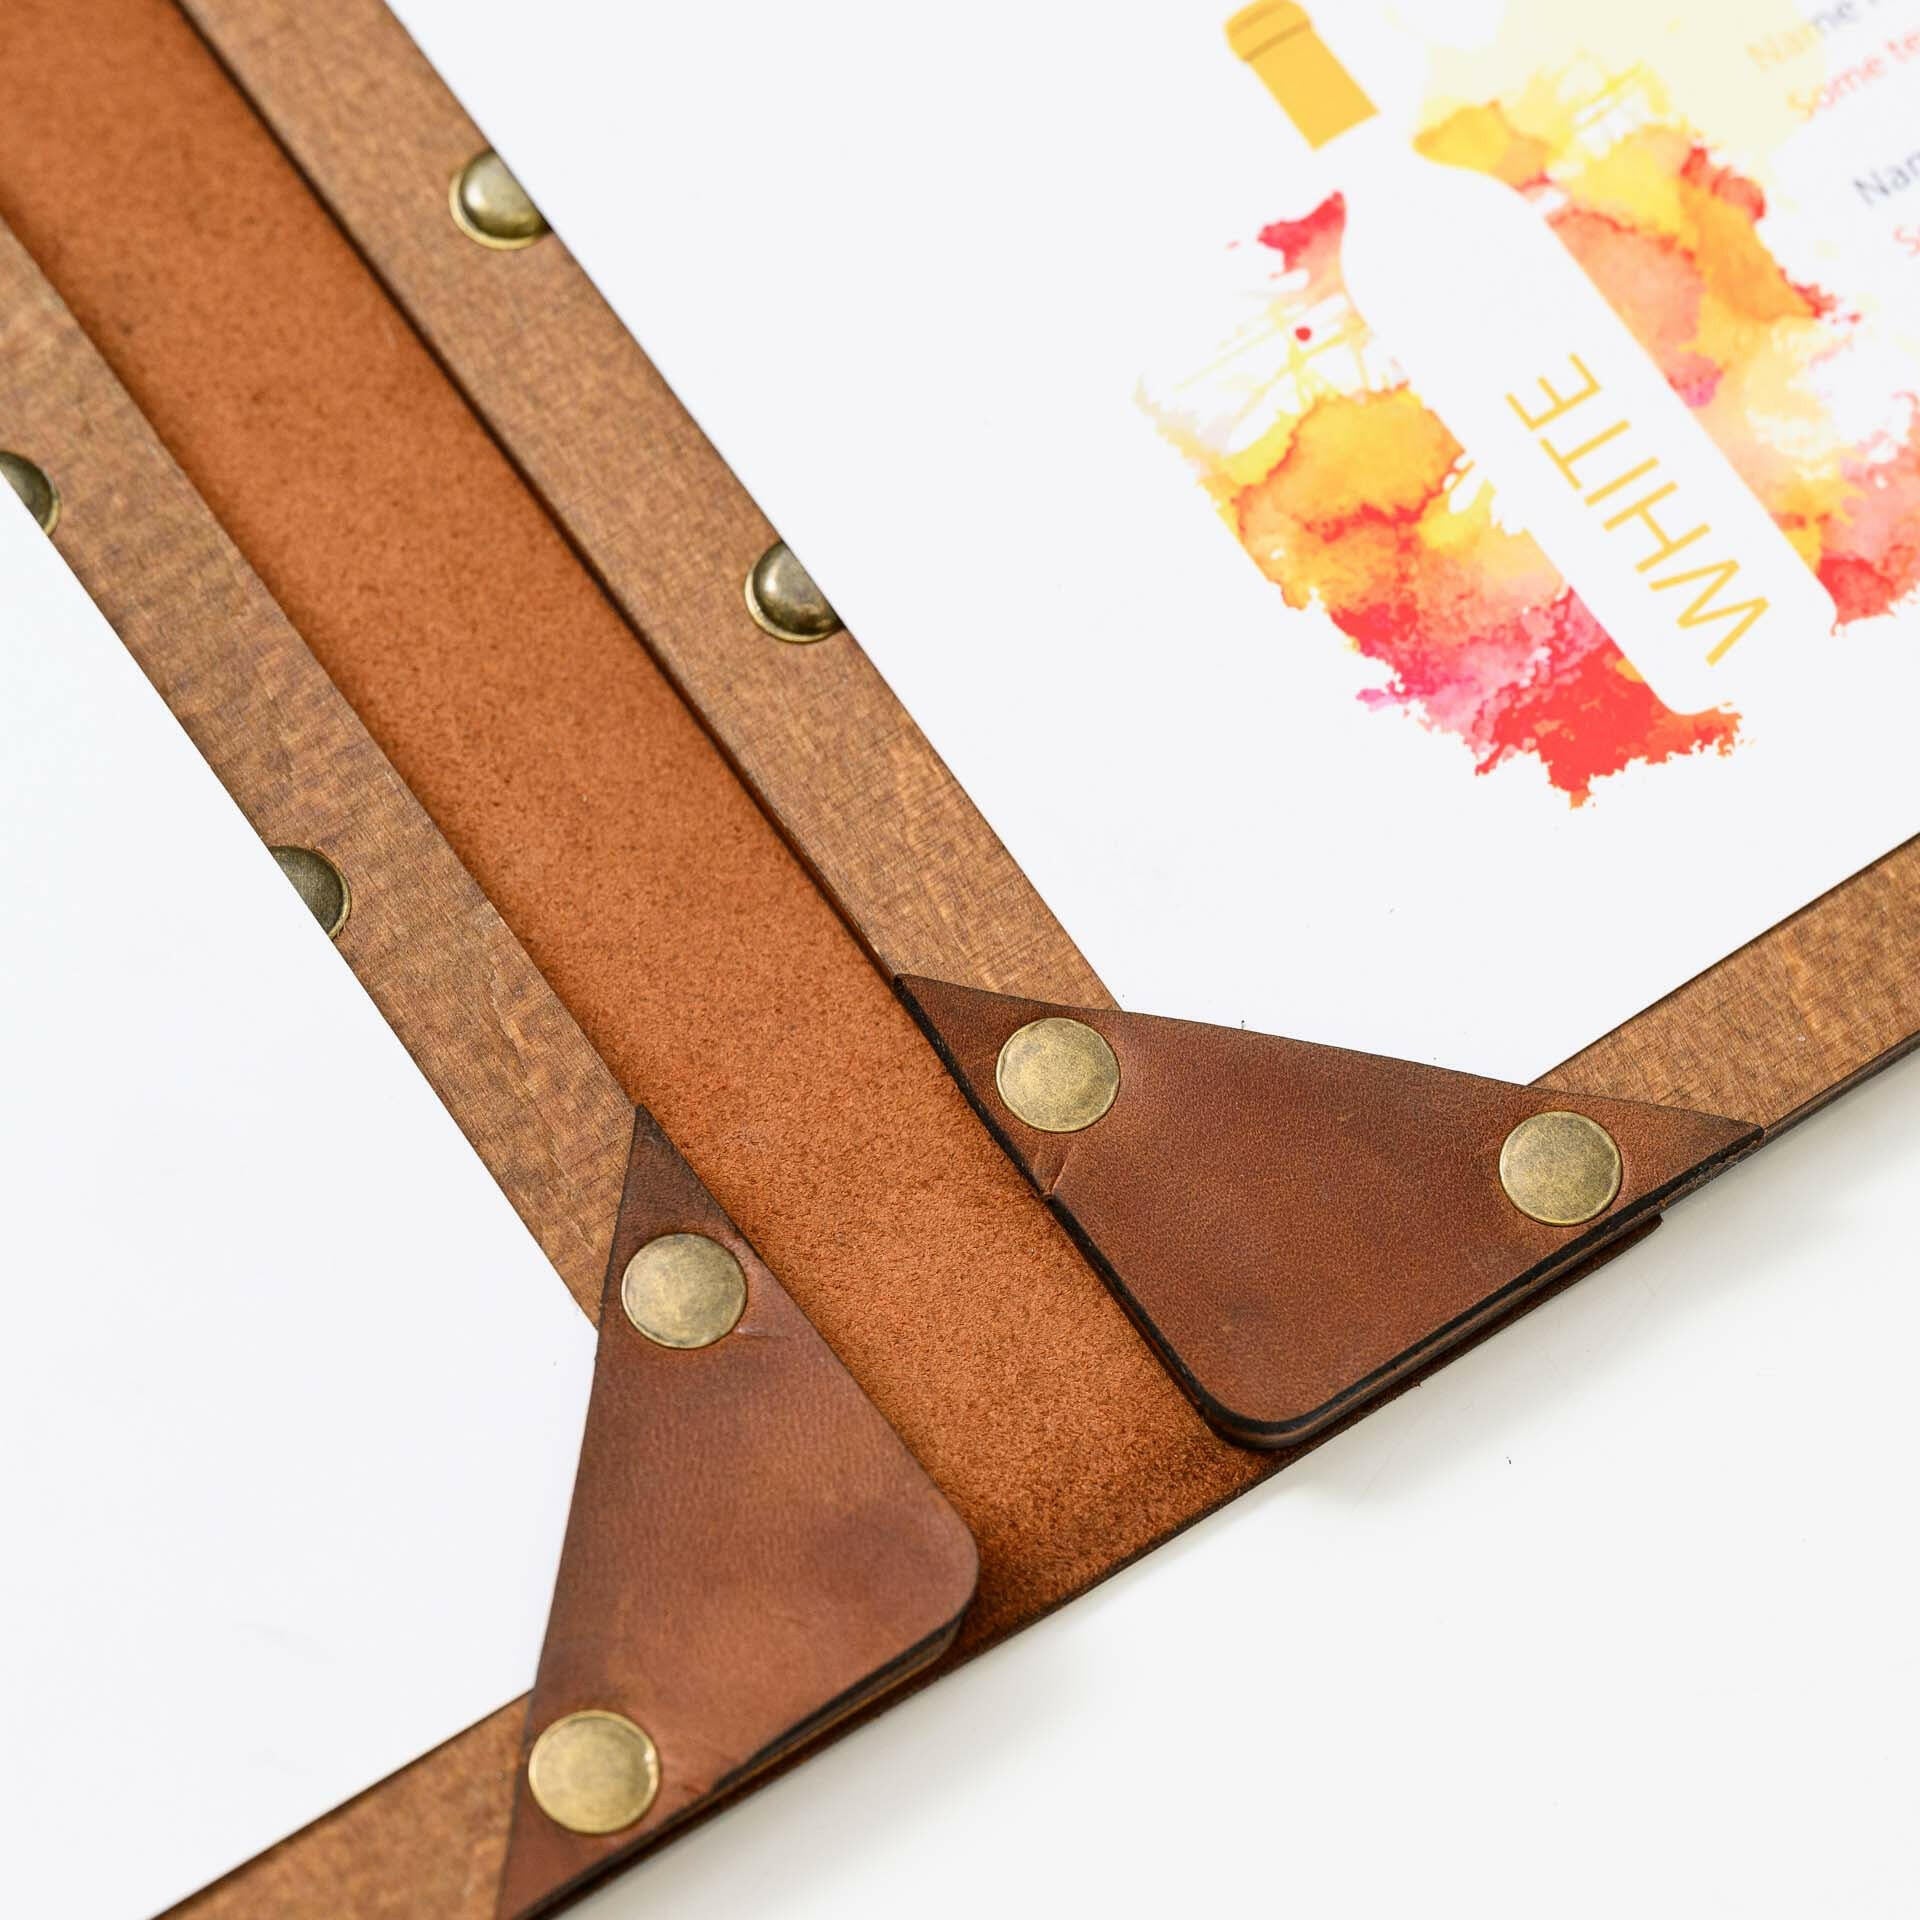 Rustic Wooden Menu Clipboard: Adds charm to your presentation with natural textures.